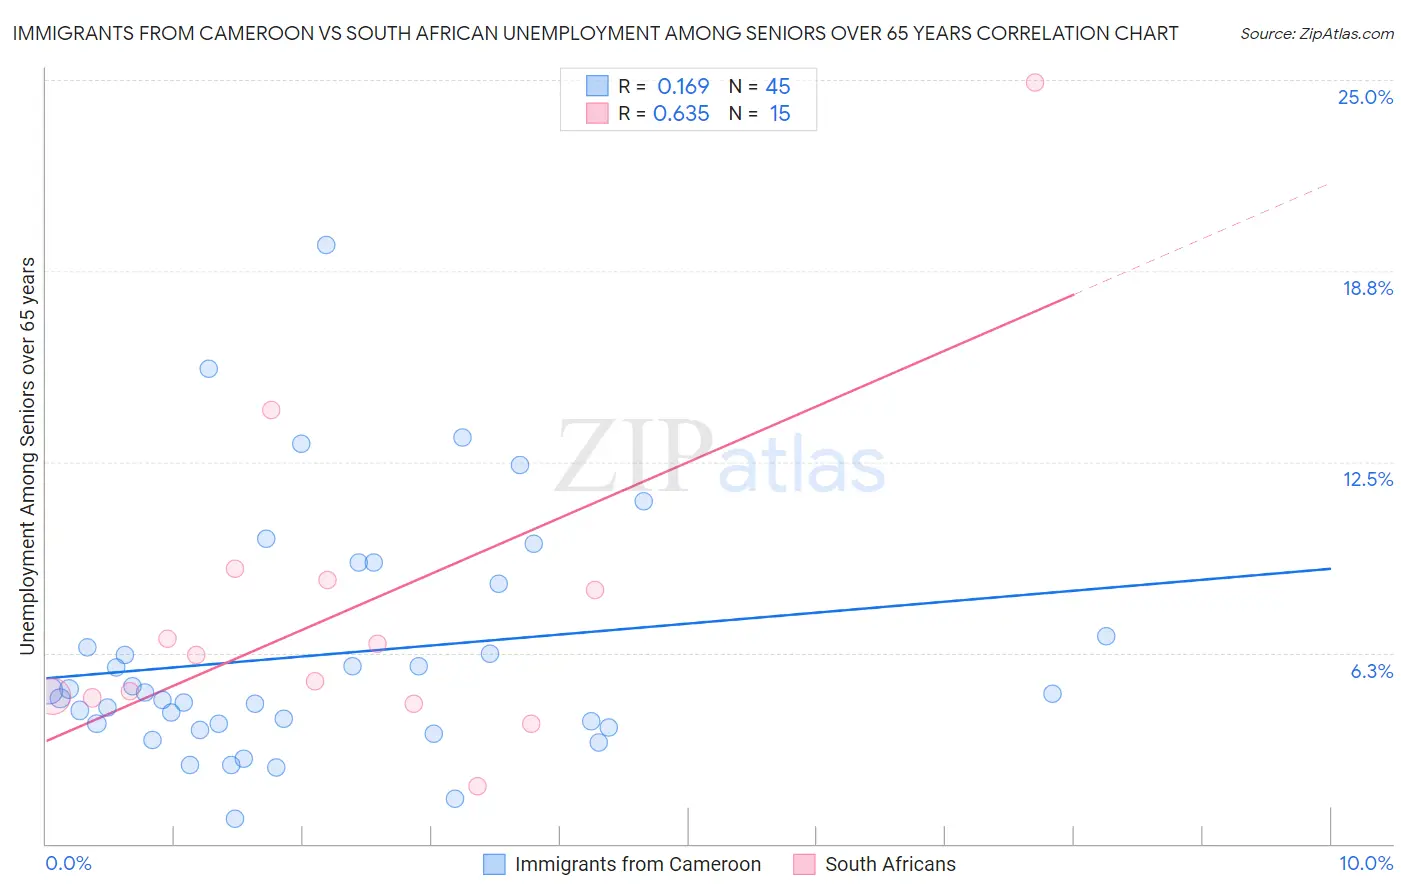 Immigrants from Cameroon vs South African Unemployment Among Seniors over 65 years